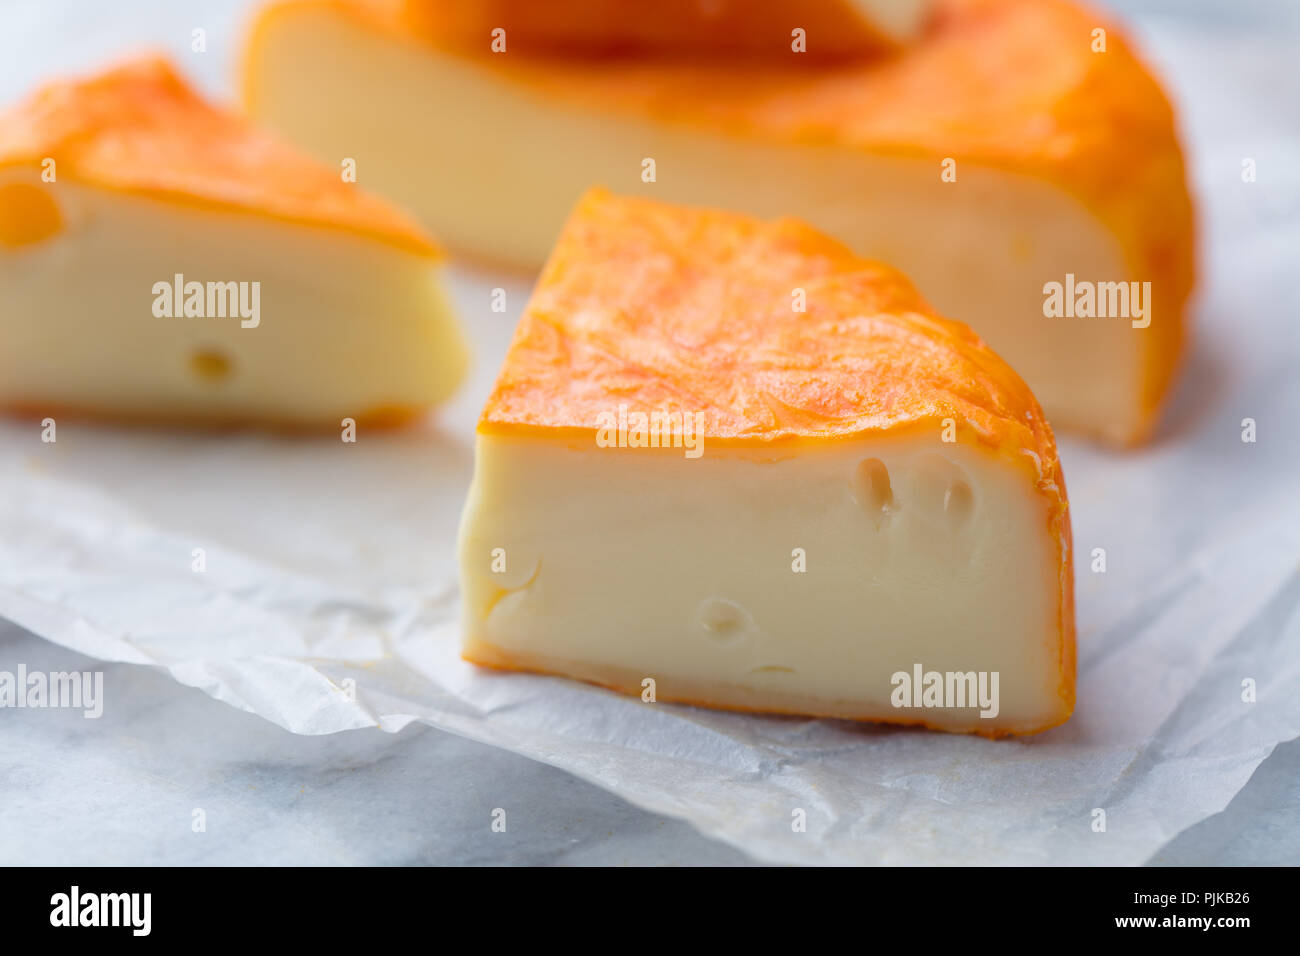 Download Slice Yellow Cheese Red Rind High Resolution Stock Photography And Images Alamy Yellowimages Mockups